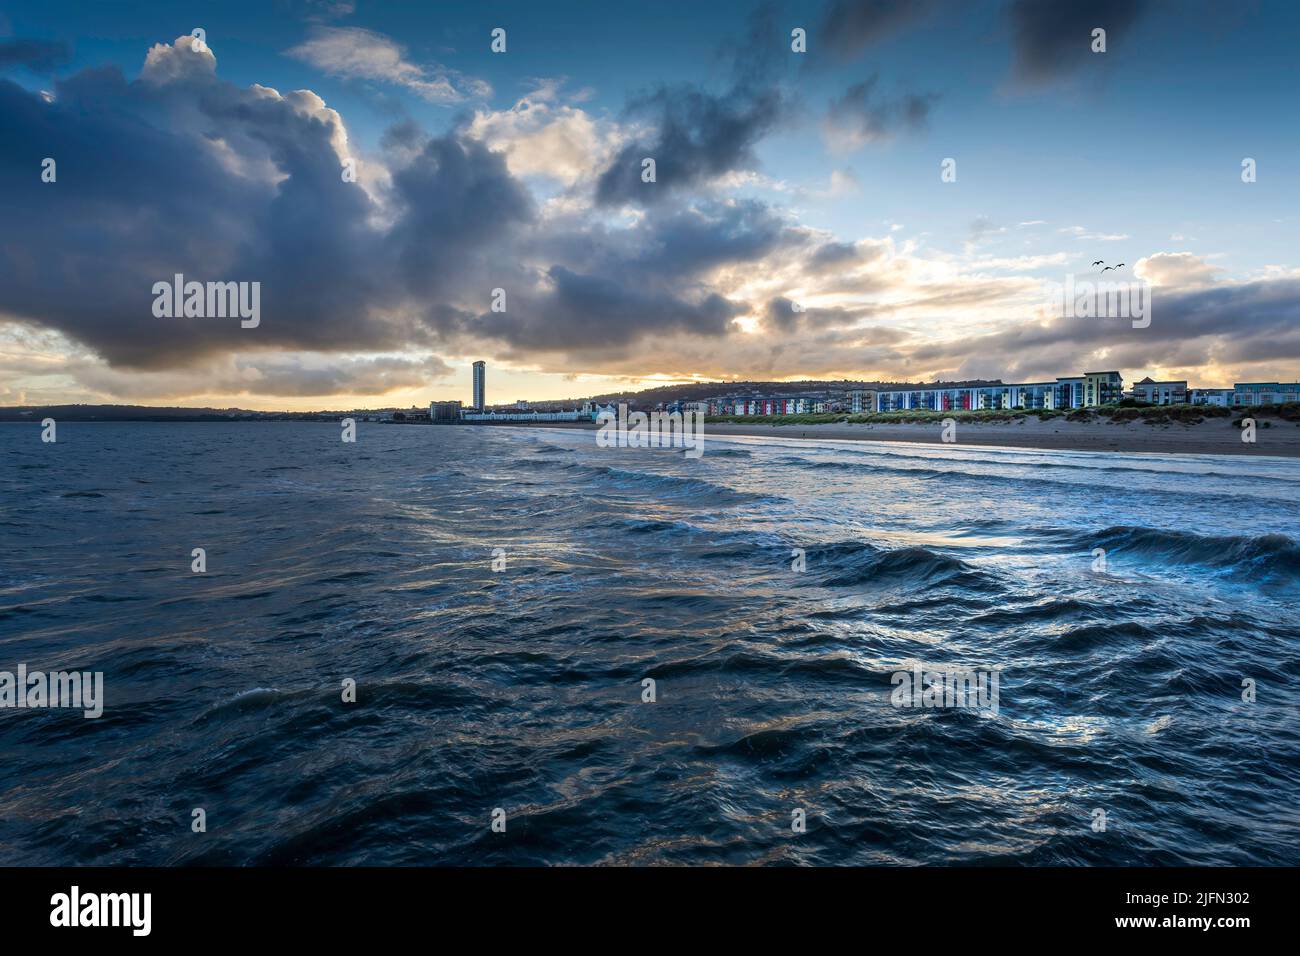 Editorial Swansea, UK - July 02, 2022: Coastal housing and a full tide at sunset on Swansea Bay in South Wales UK Stock Photo